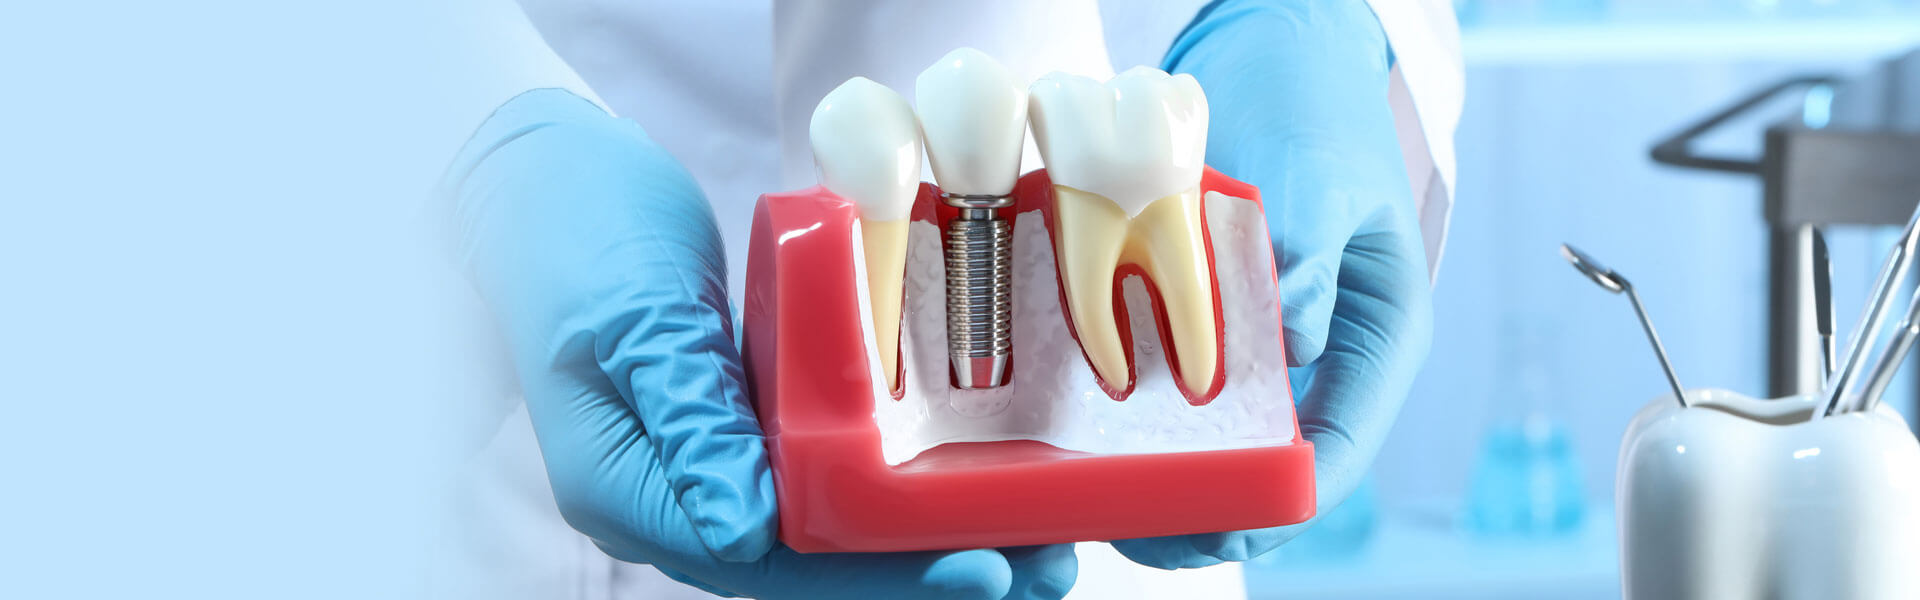 How Long Does It Take To Recover From A Dental Implant?